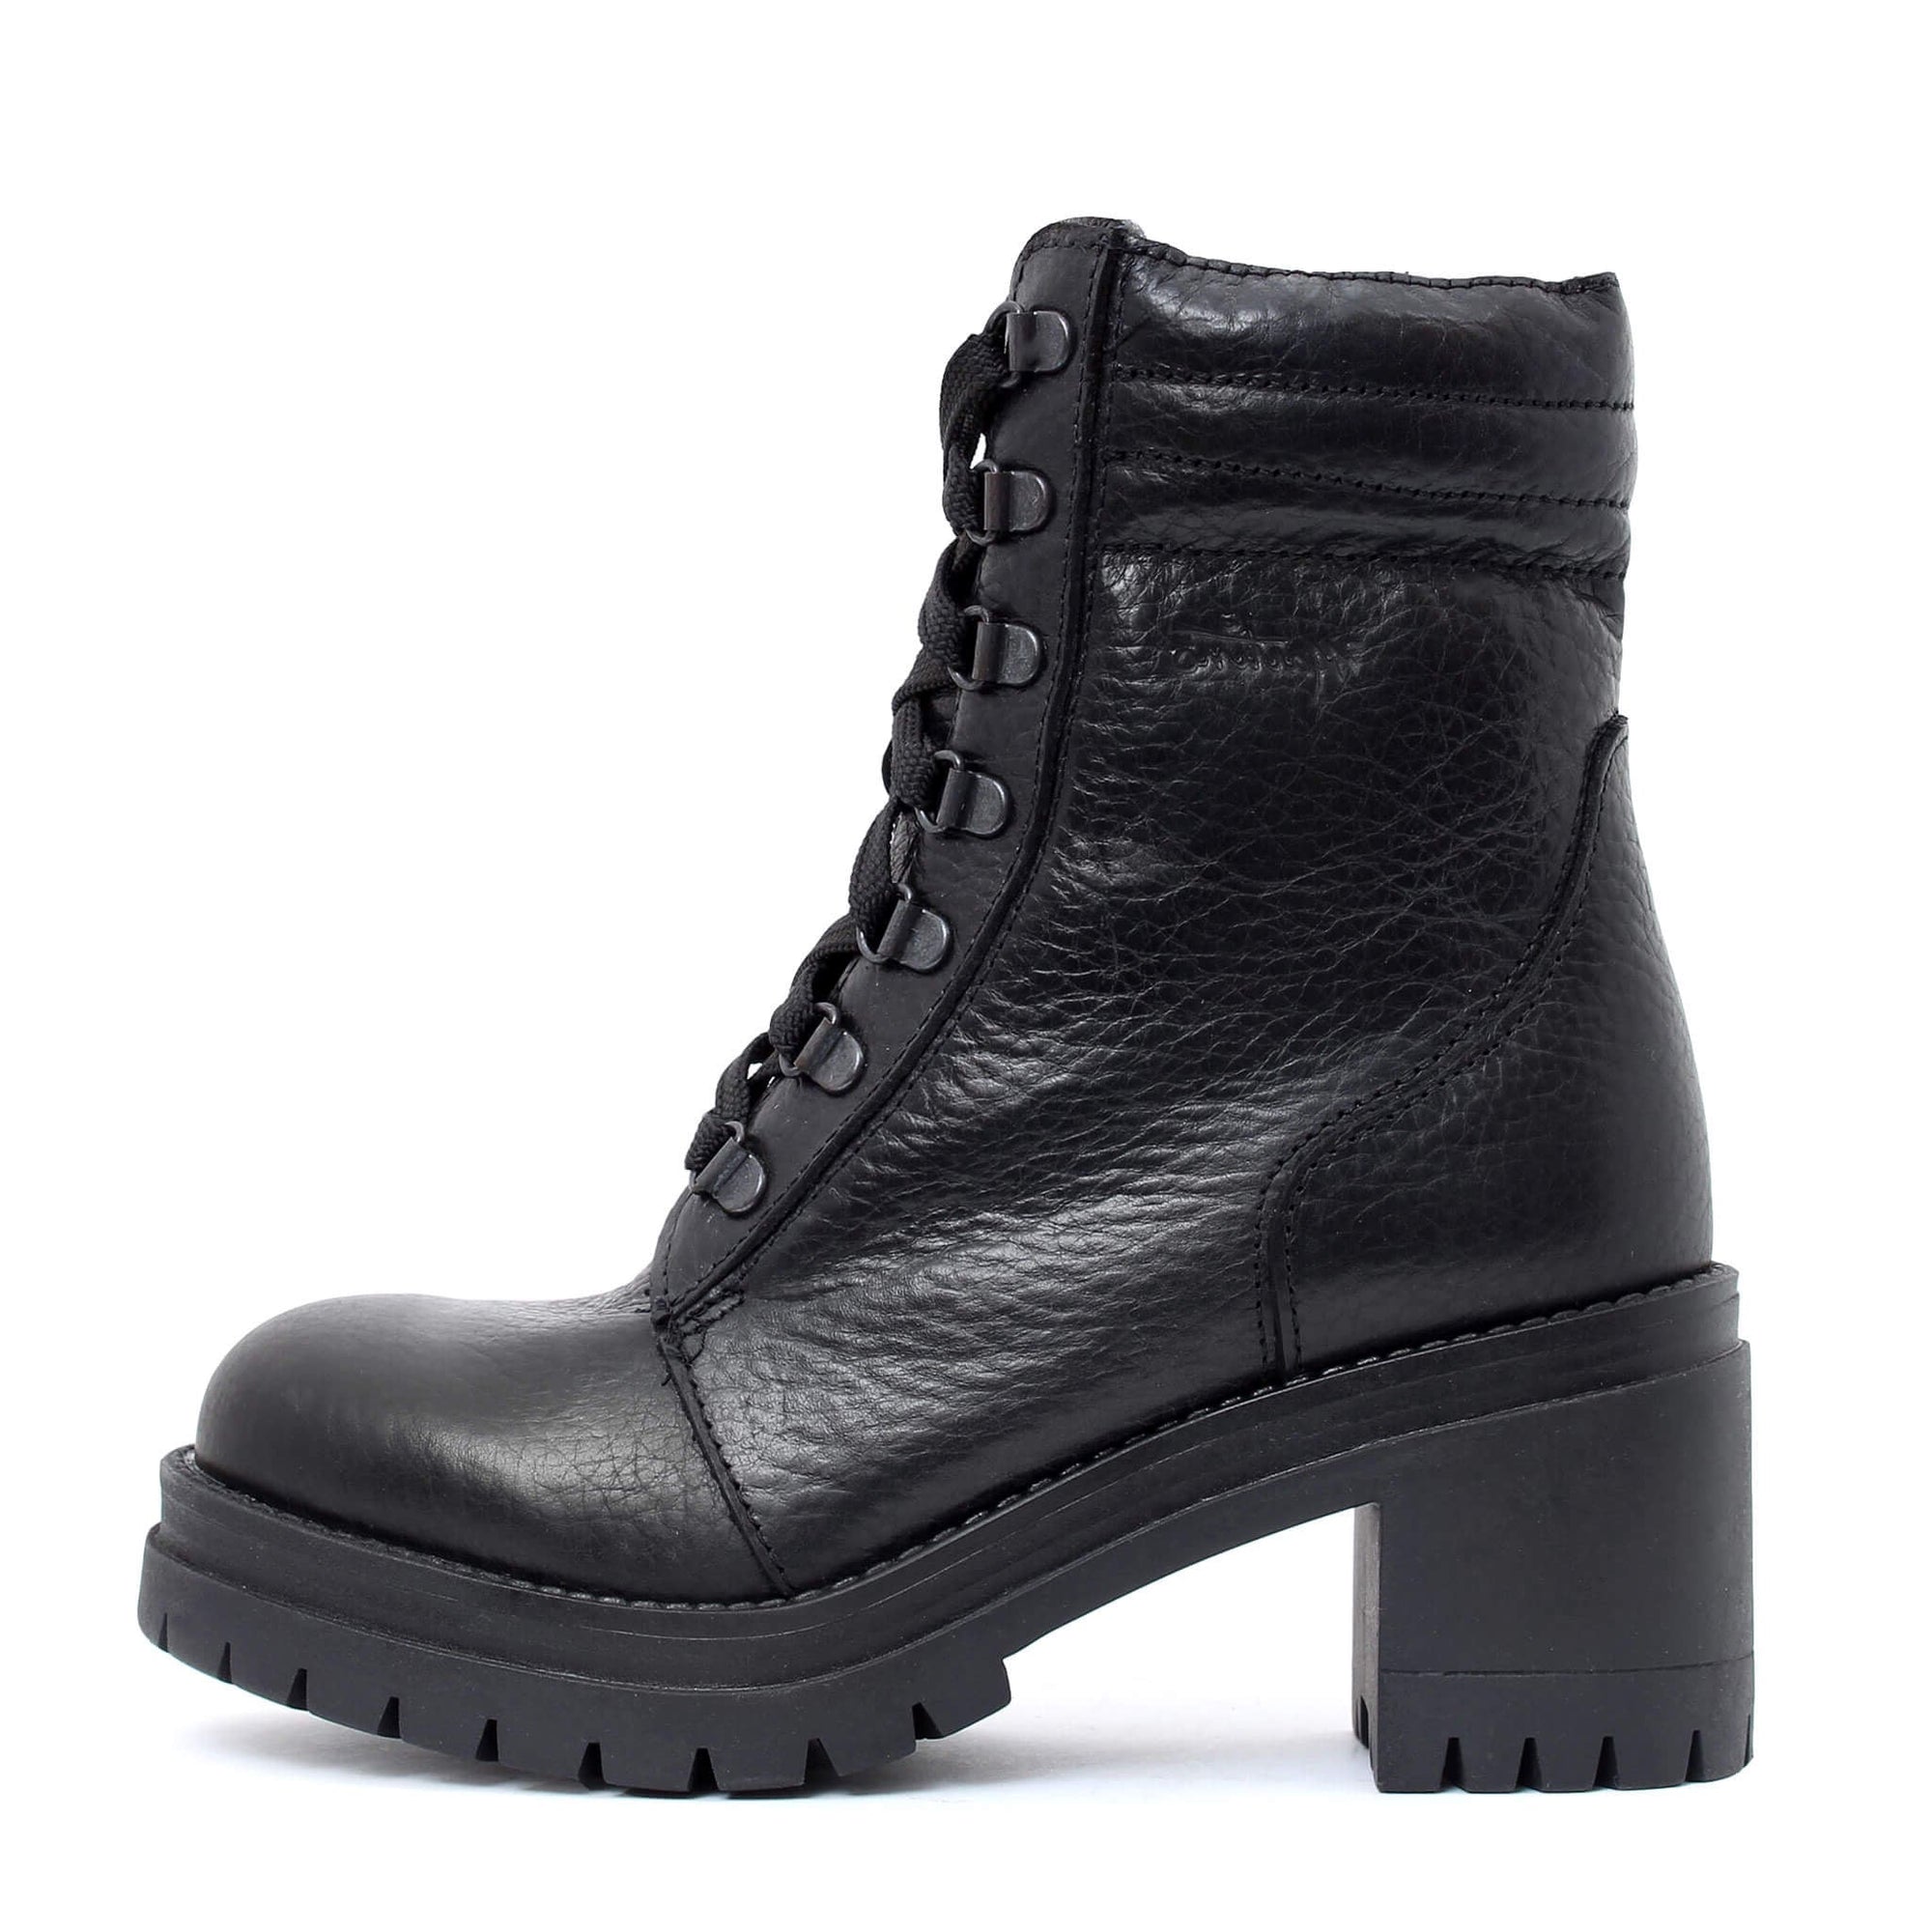 Phoebe fall boot for women 